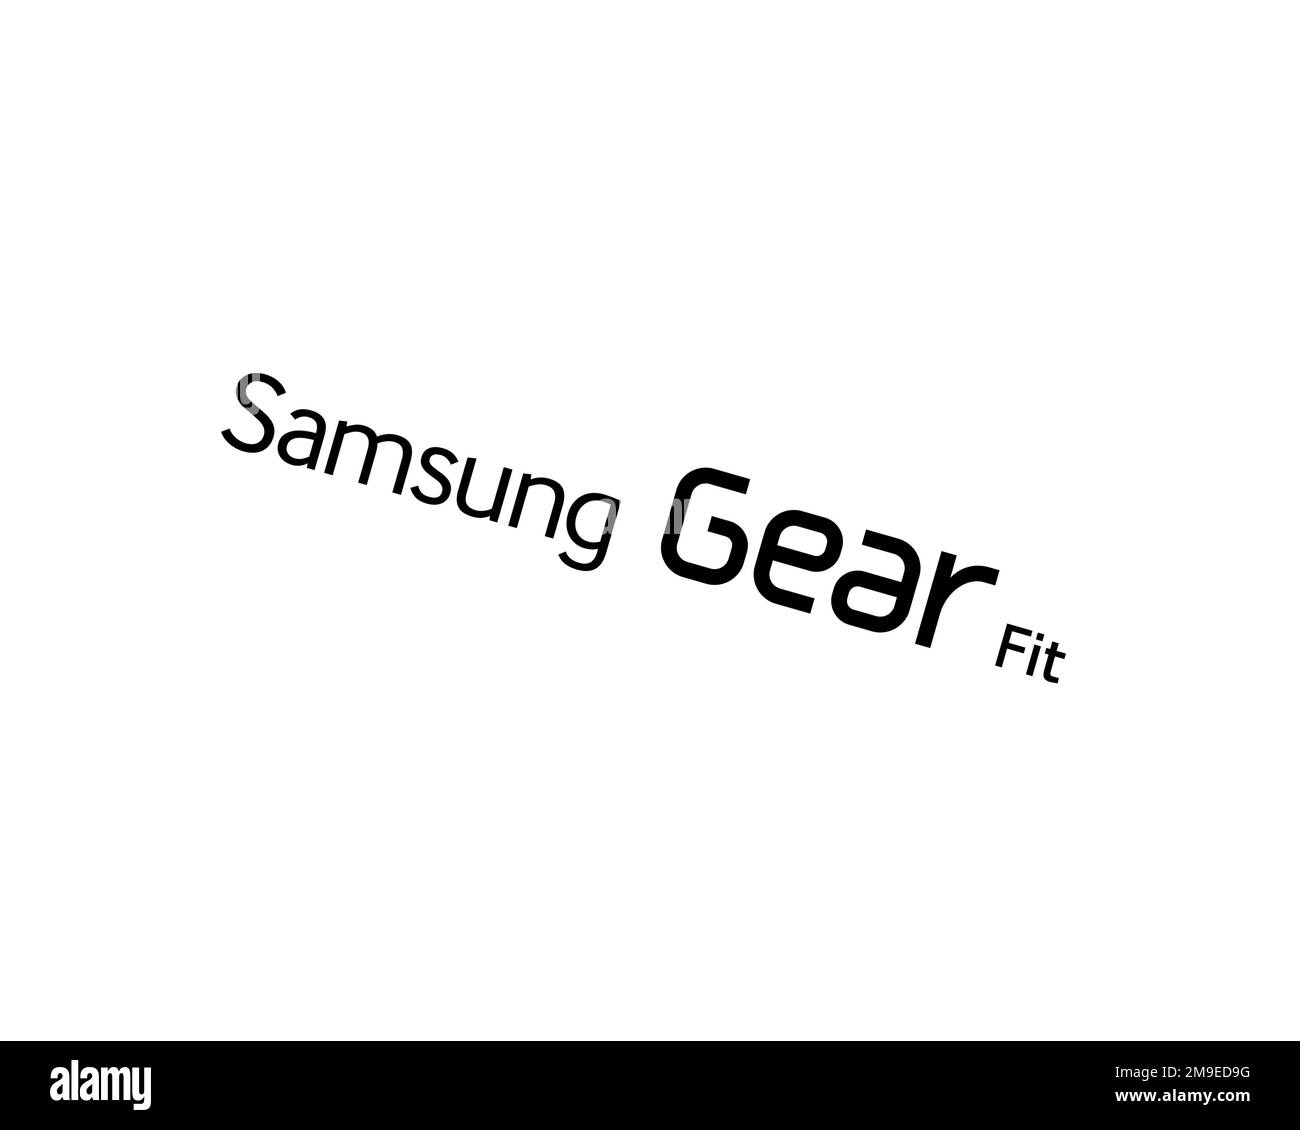 Samsung Gear Fit, Rotated Logo, White Background B Stock Photo